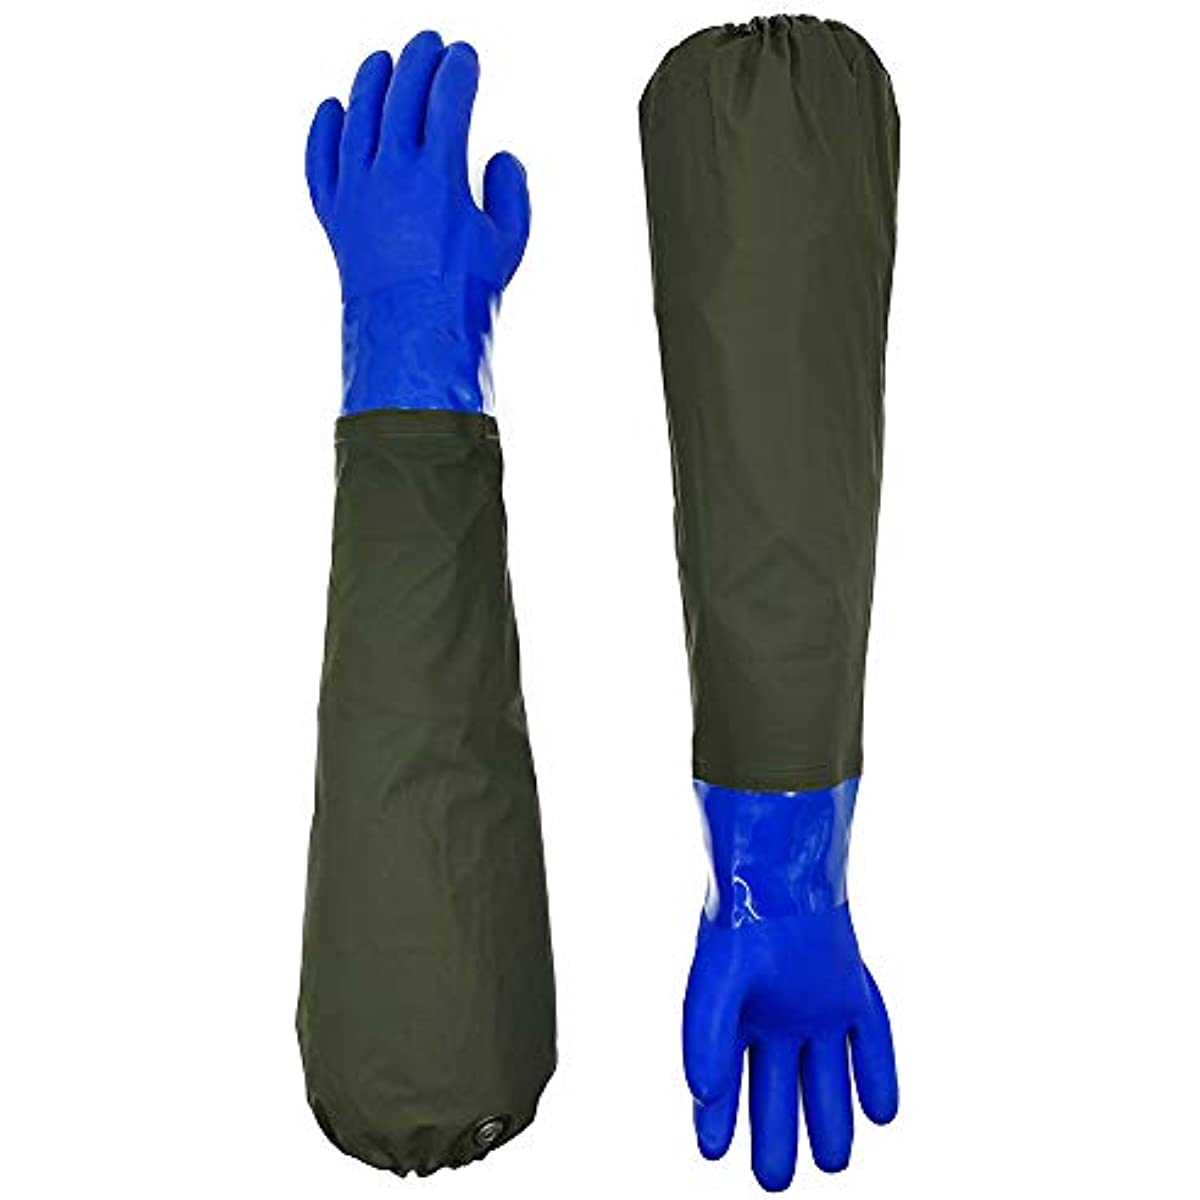 28 Waterproof Rubber Pond Gloves - Chemical & Oil Resistant, Reusable,  Insulated PVC Coated for Industrial, Mechanical, Fishing & Aquarium Use.